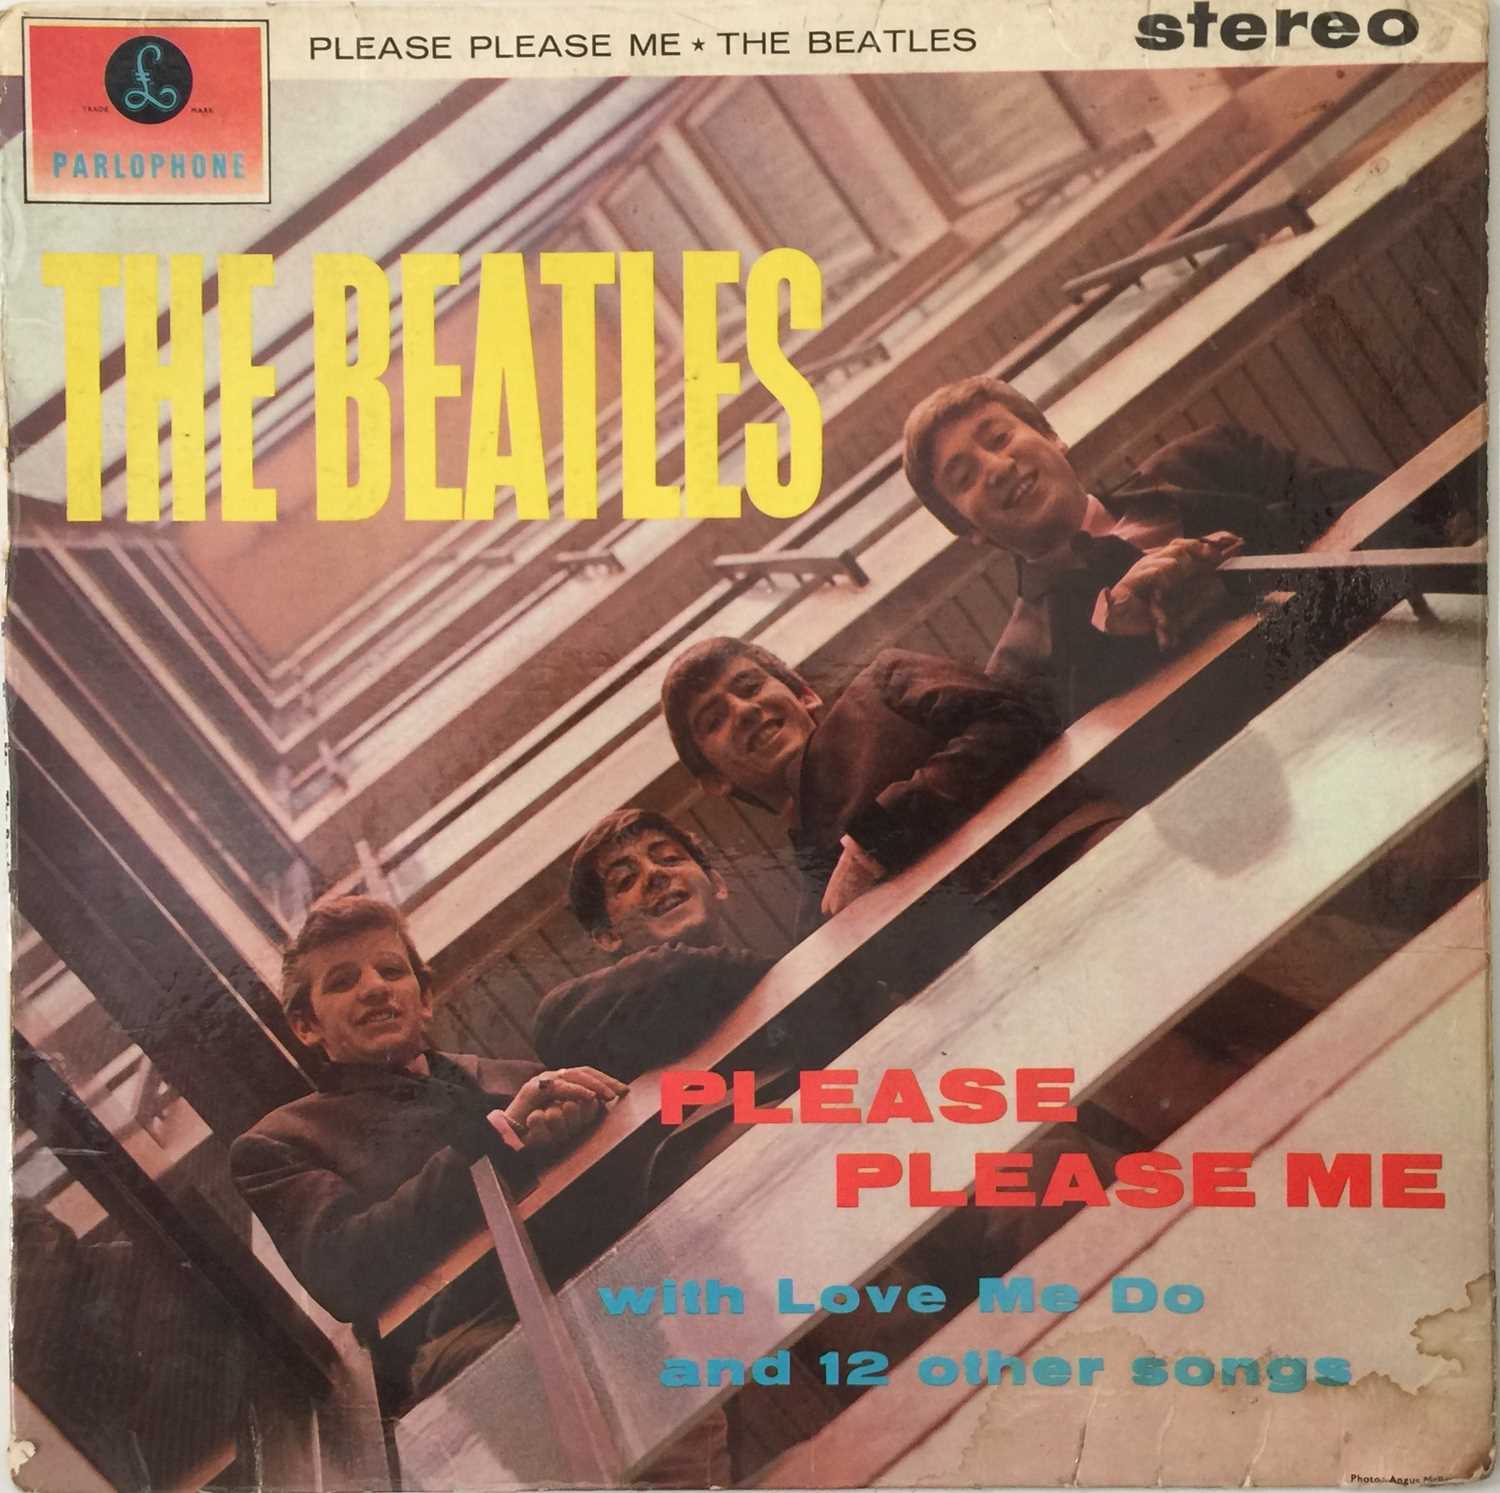 THE BEATLES - PLEASE PLEASE ME LP (ORIGINAL UK STEREO 'BLACK AND GOLD' PCS 3042) - Image 2 of 5